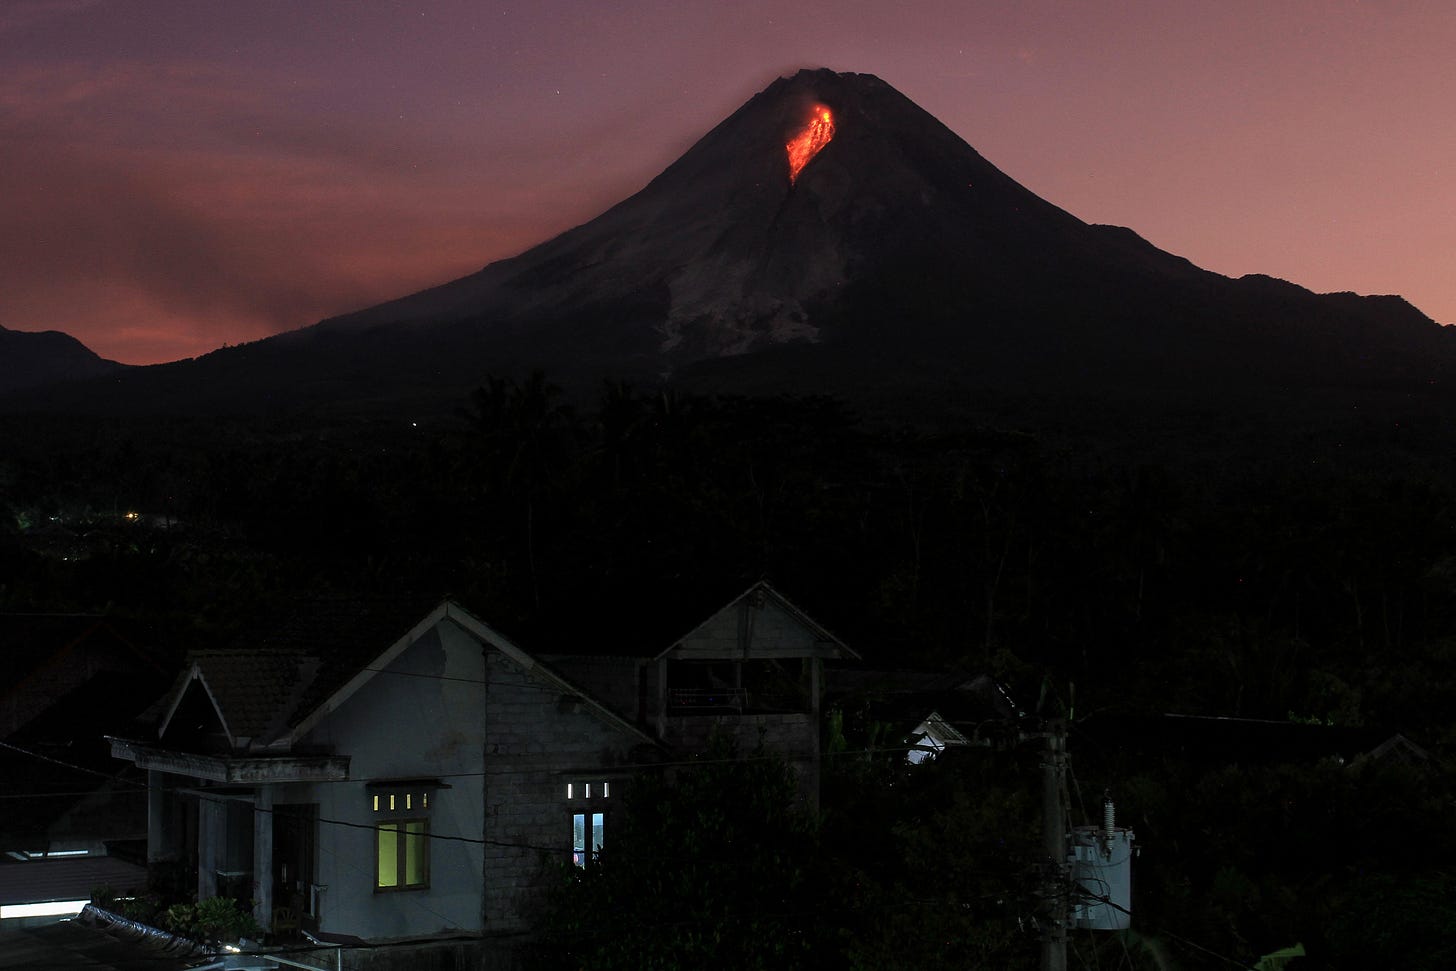 Lava spews out of Mount Merapi, Indonesia's most active volcano, as seen from the Kaliurang Selatan village in Srumbung, Magelang, Central Java on March 12, 2023. (Photo by Devi Rahman/AFP via Getty Images)